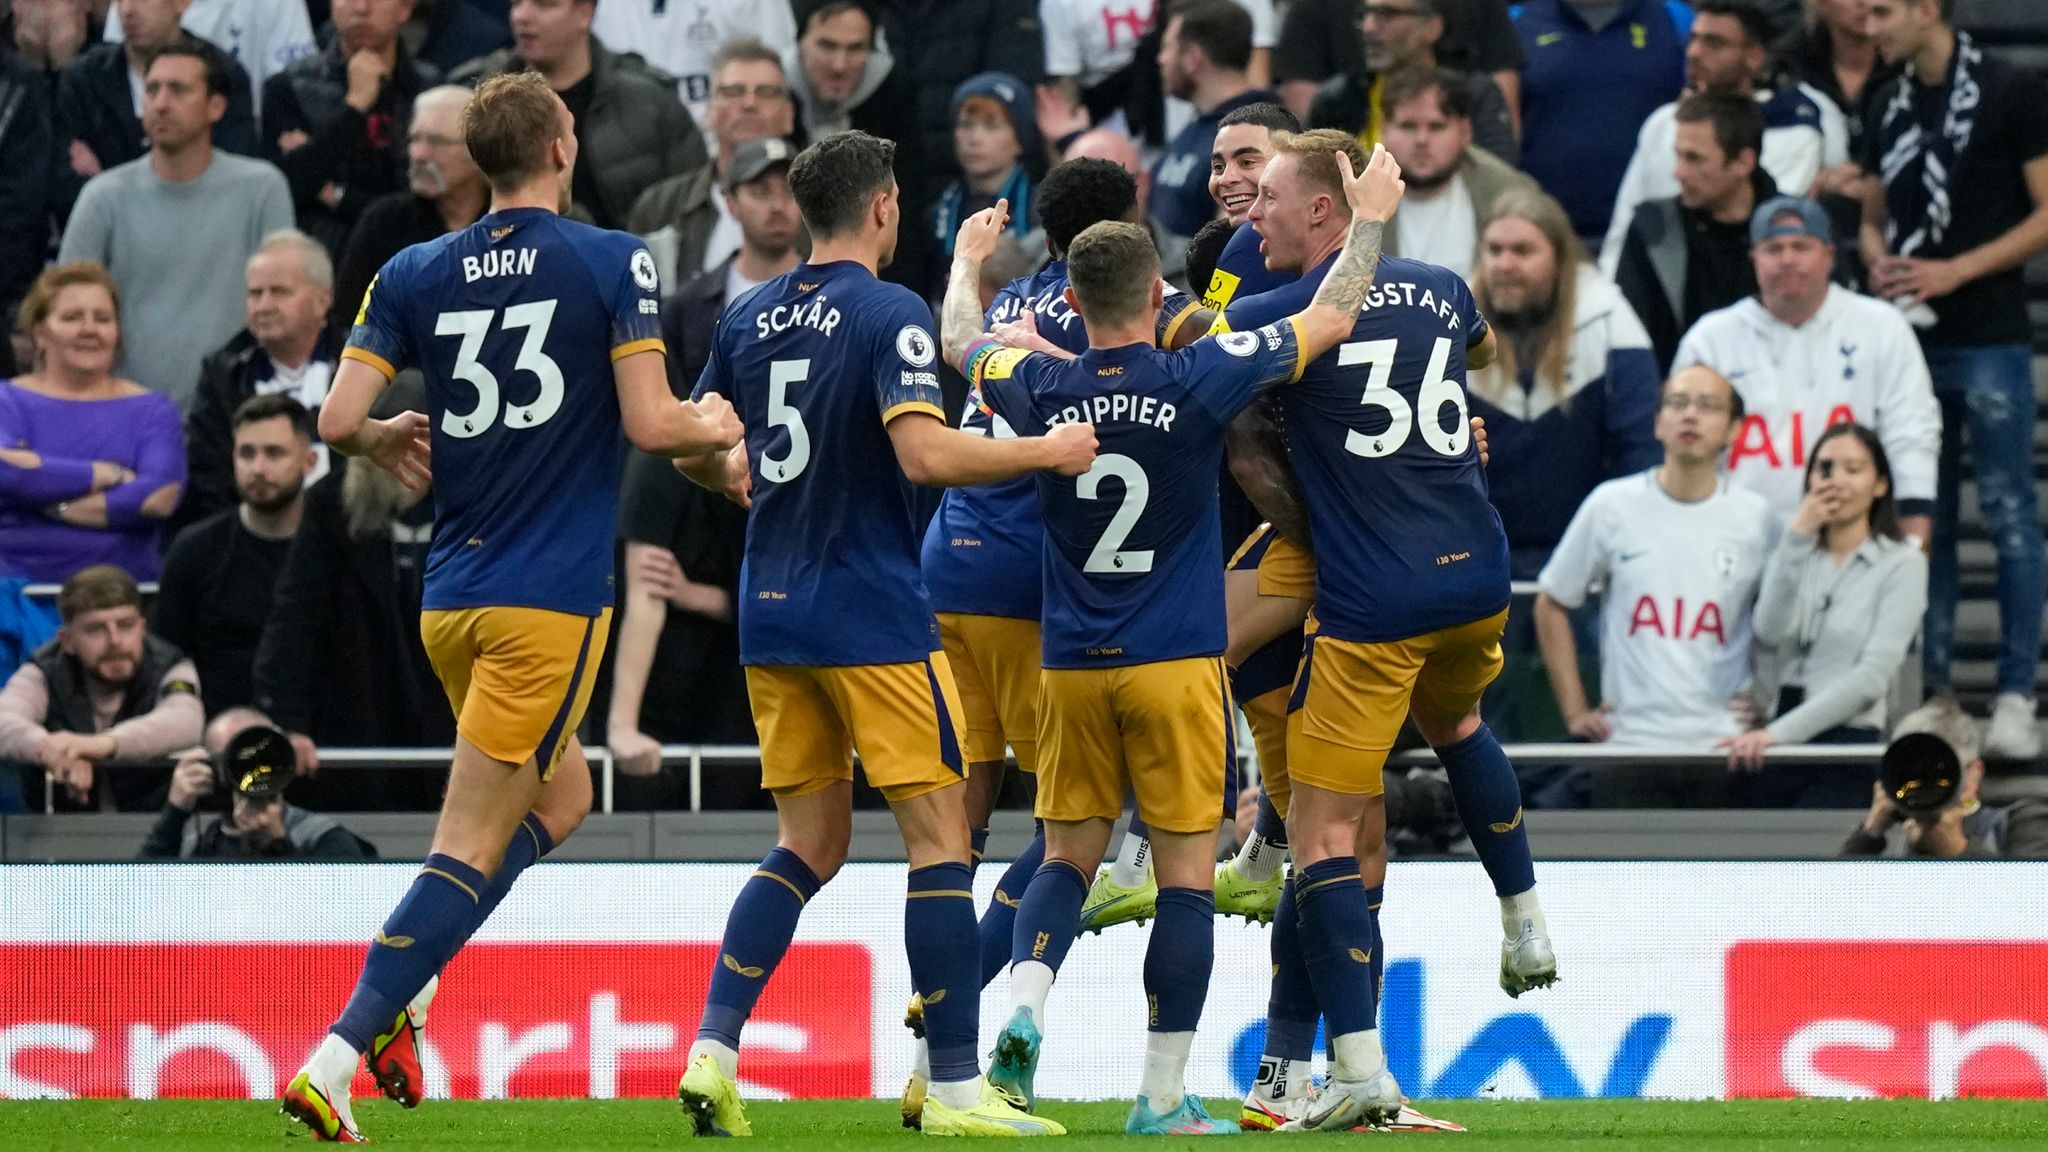 Newcastle routs Tottenham 6-1, boosts Champions League hopes - The